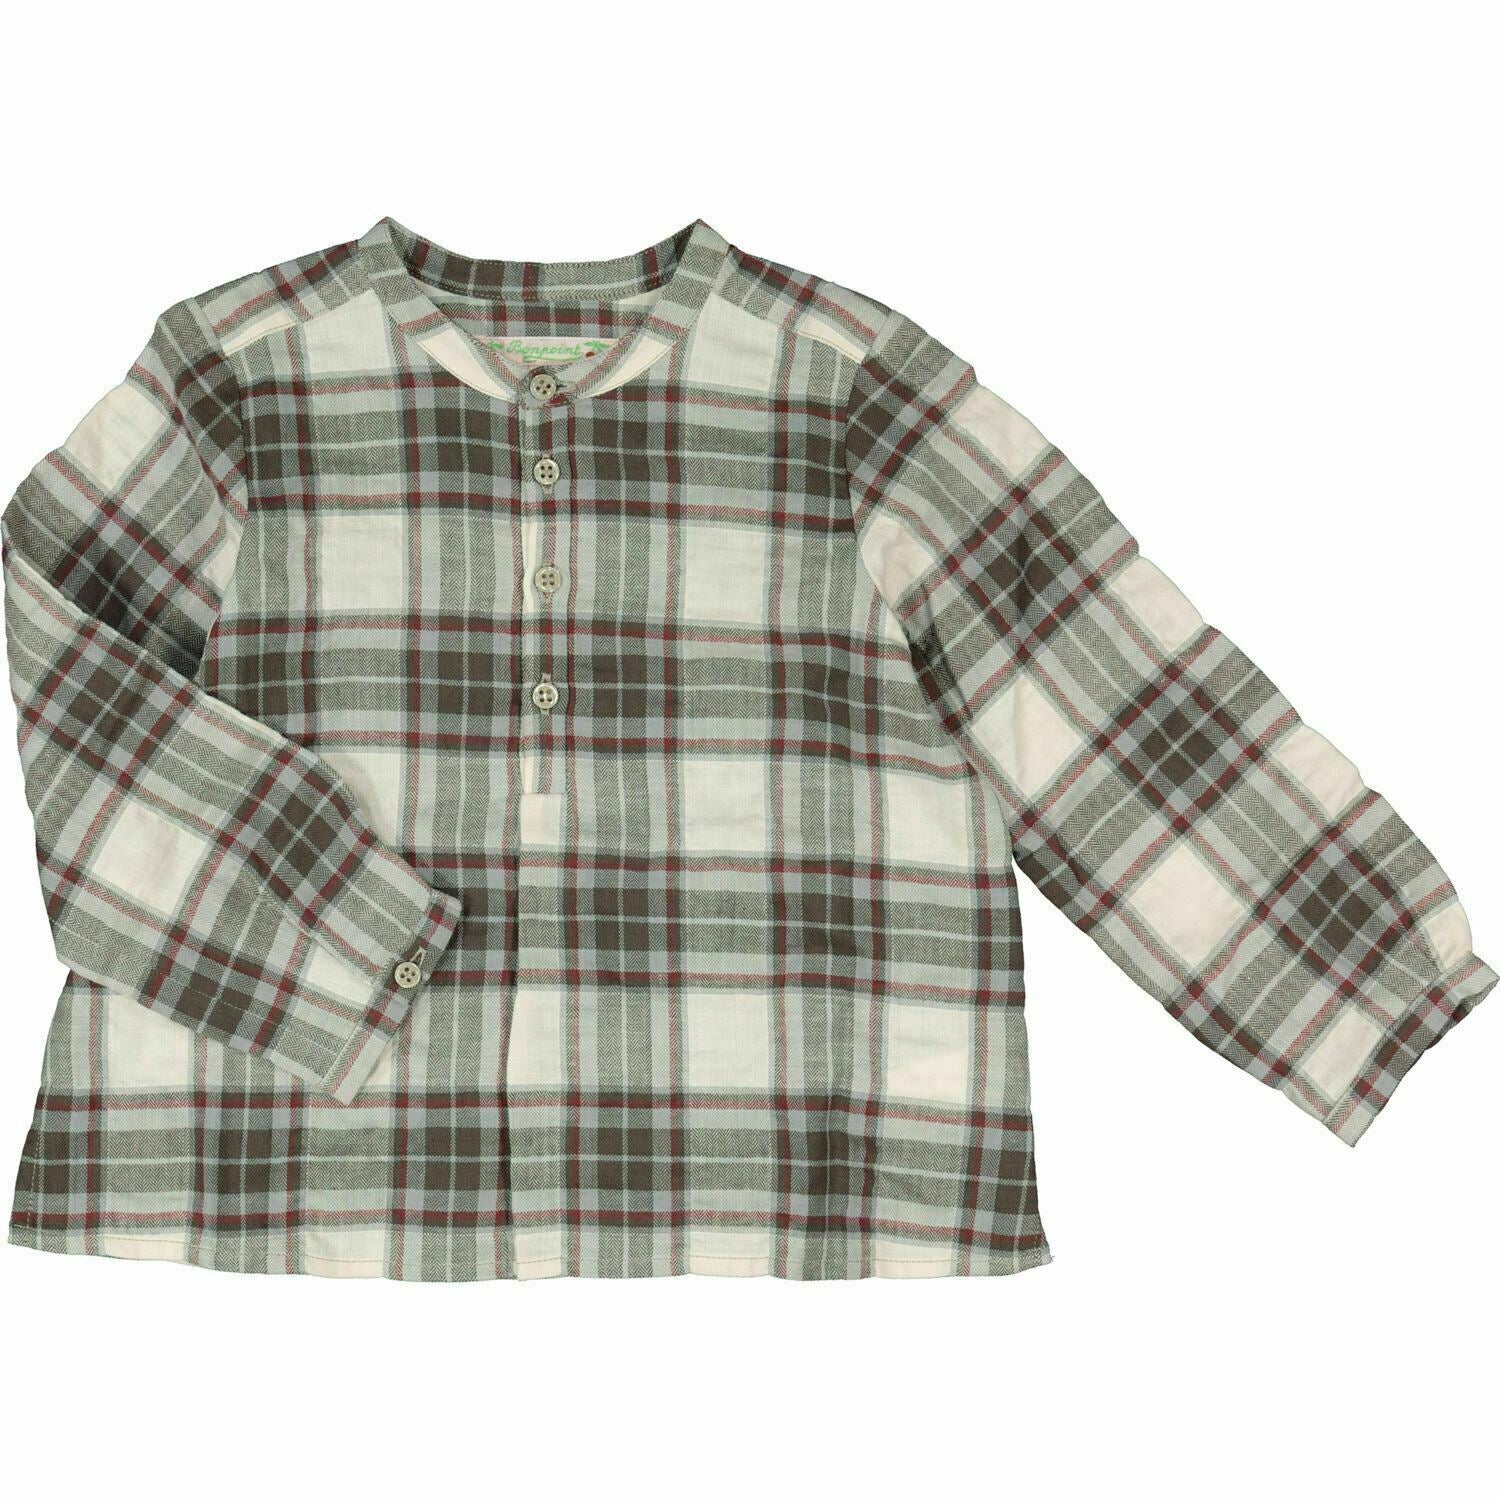 BONPOINT Baby Girls' Long Sleeve Checked Shirt Top, White/Red/Grey, 6 months